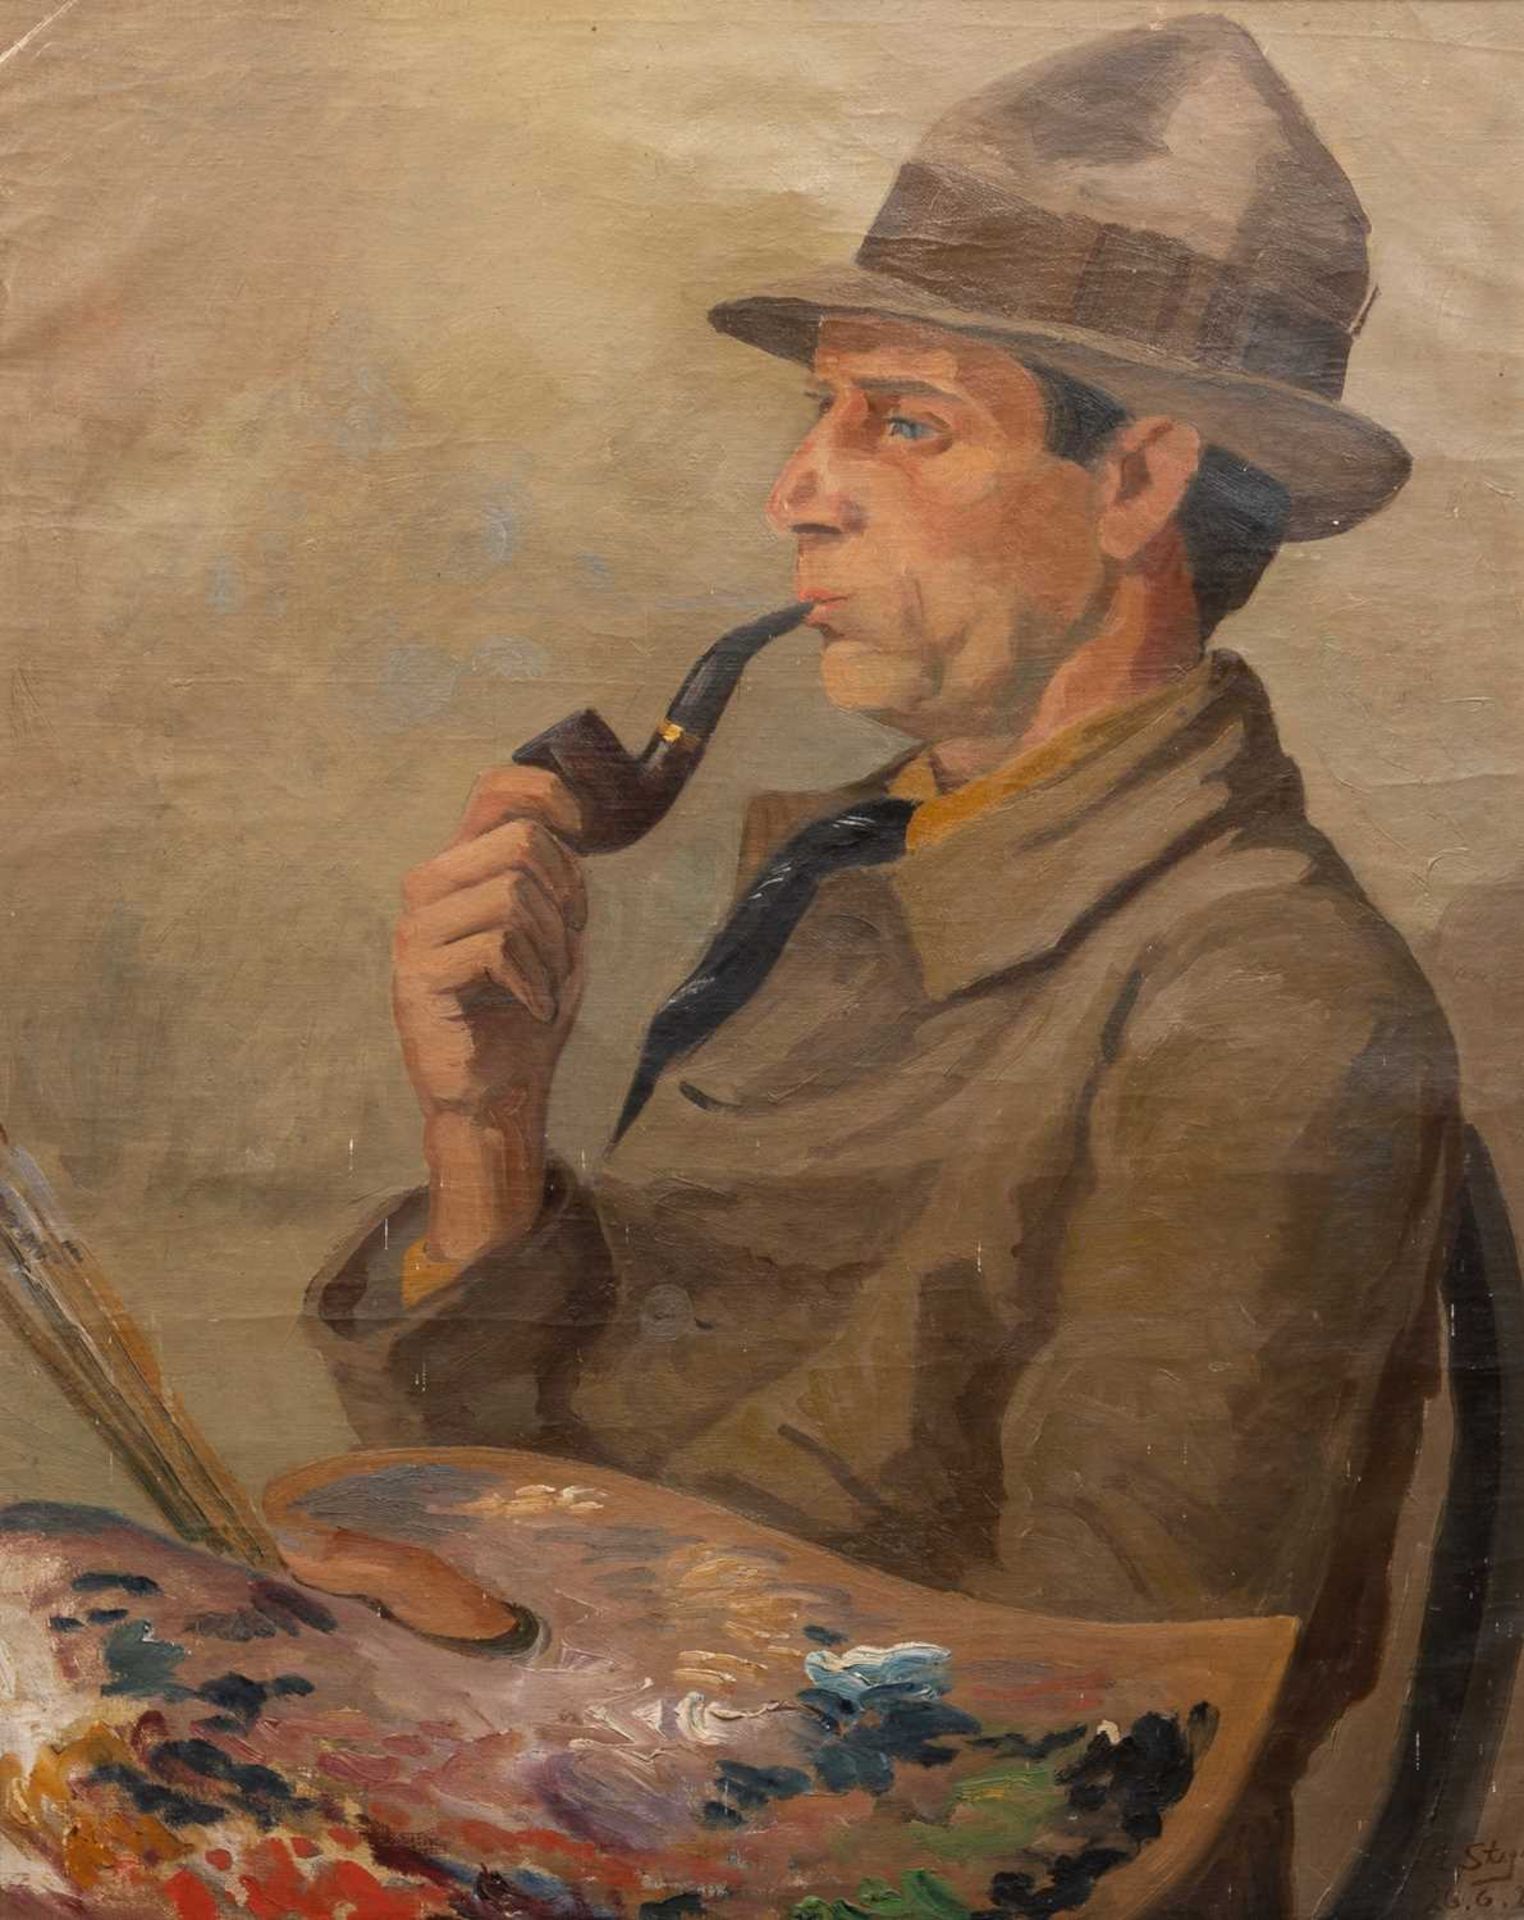 A portrait of the artist smoking with pipe with his palette, Danish school